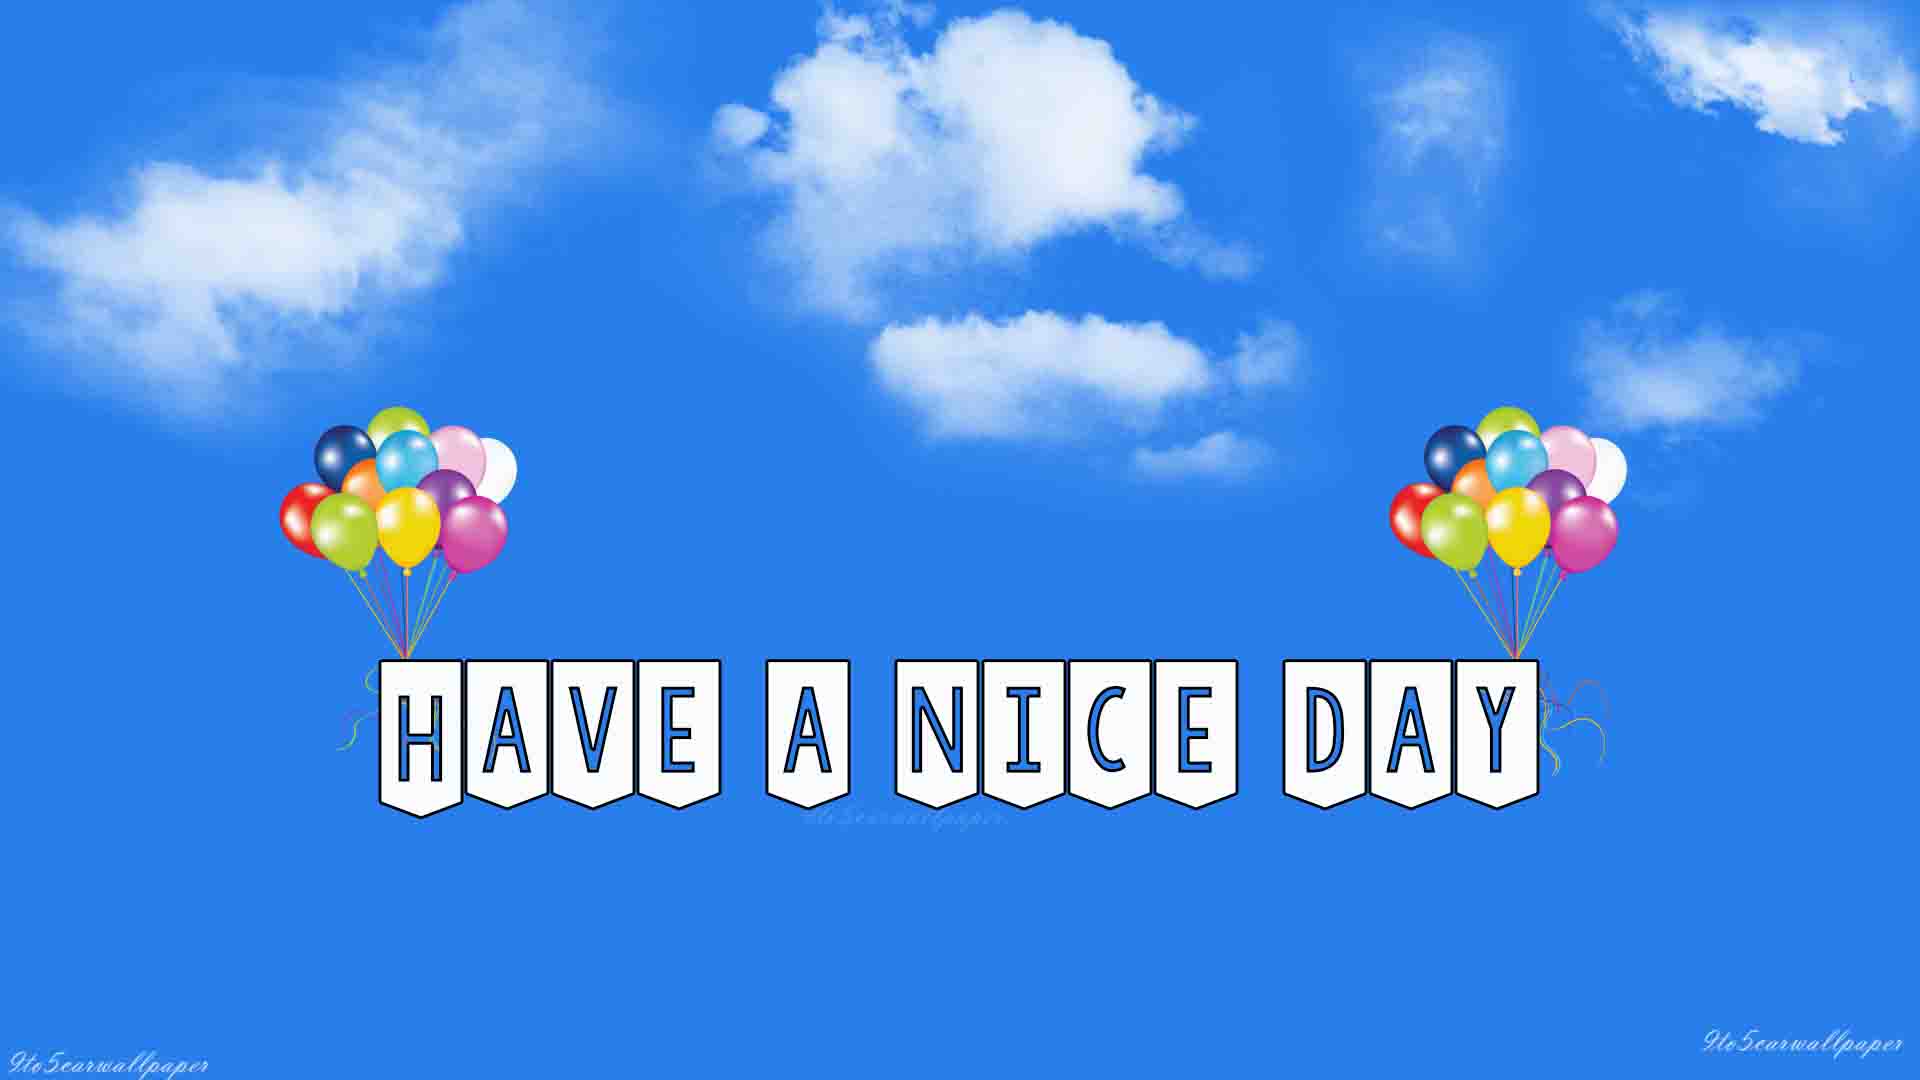 Have A Nice Day HD Wallpaper Tourism Day 2017 HD Wallpaper